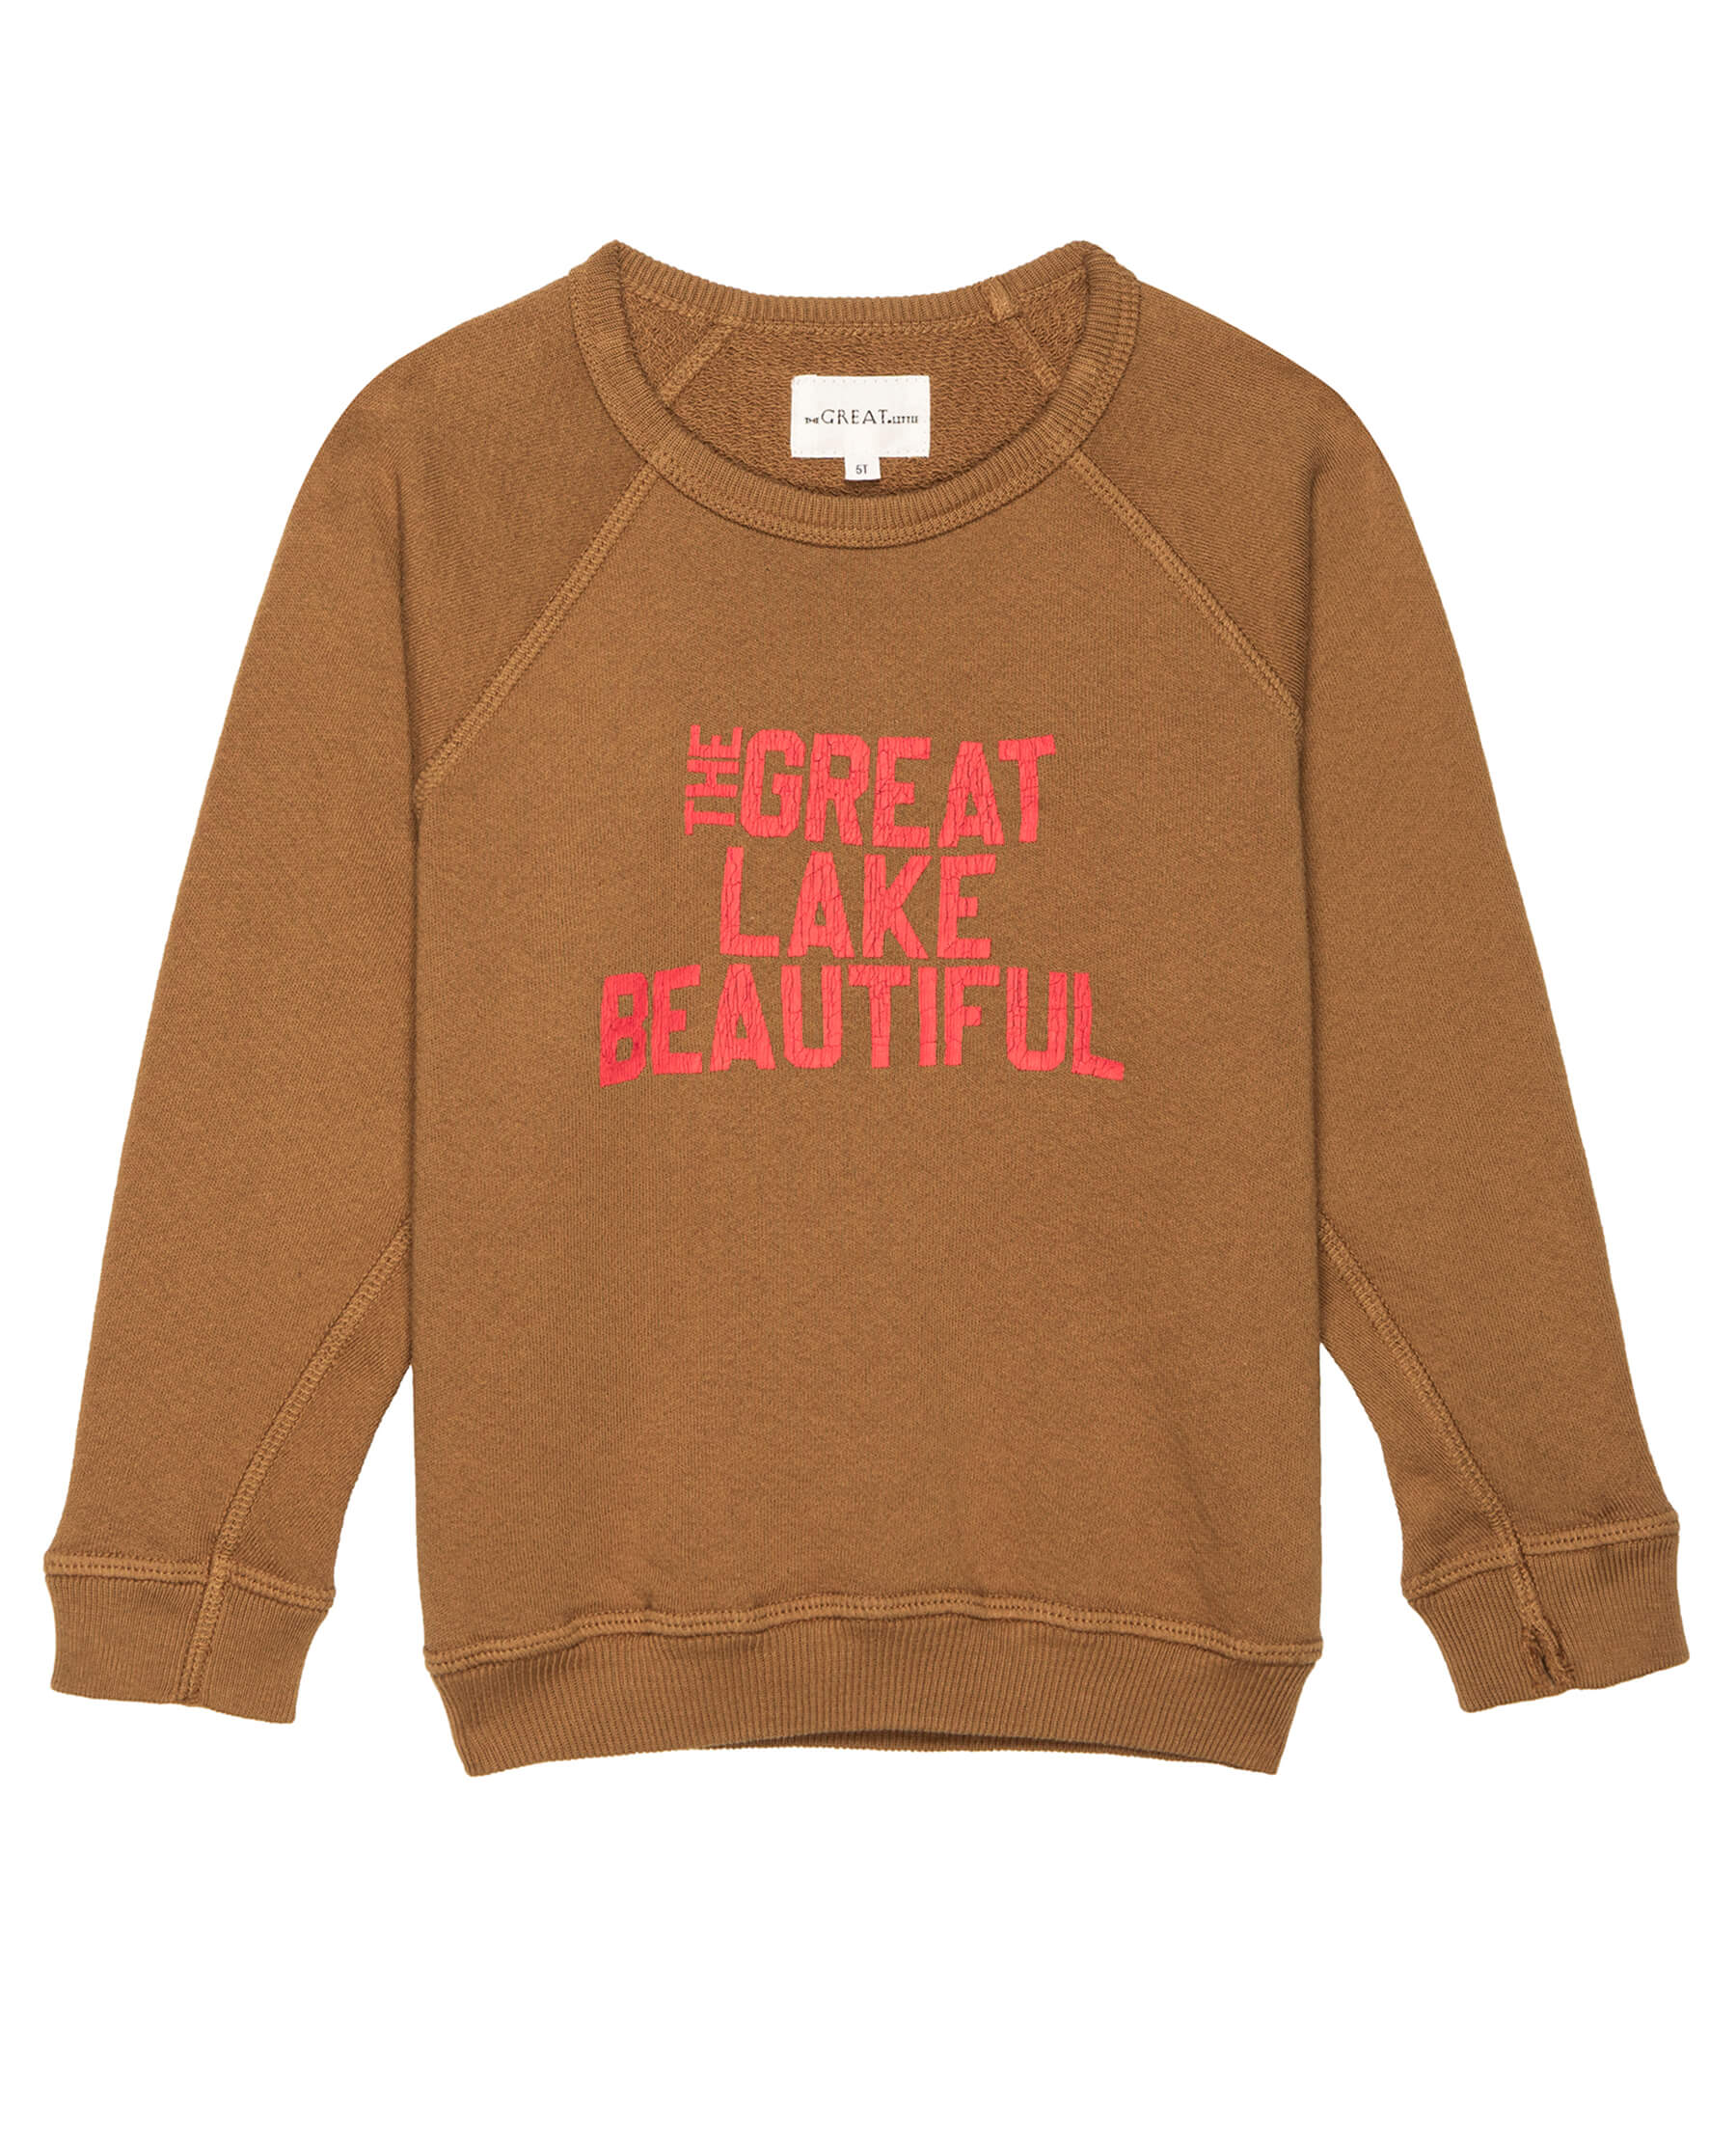 The Little College Sweatshirt. -- Bright Maple with The Great Lake Beautiful Graphic